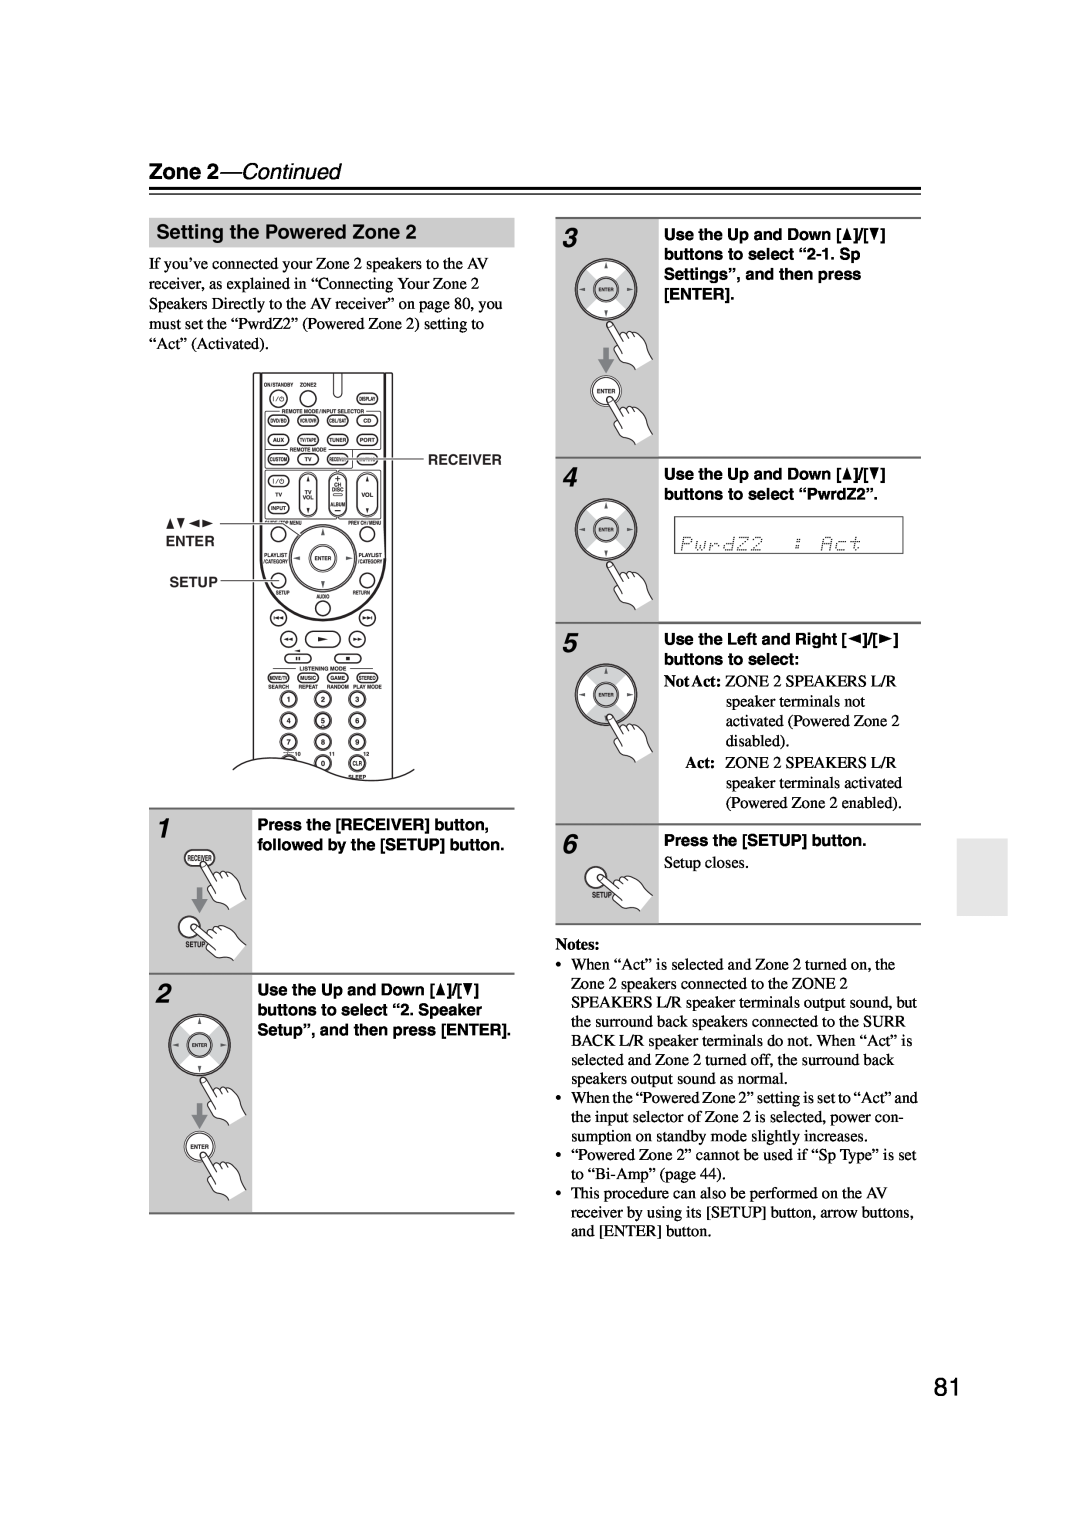 Onkyo HT-S6200, 29344937 instruction manual Zone 2—Continued, Setting the Powered Zone, Setup closes, Notes 